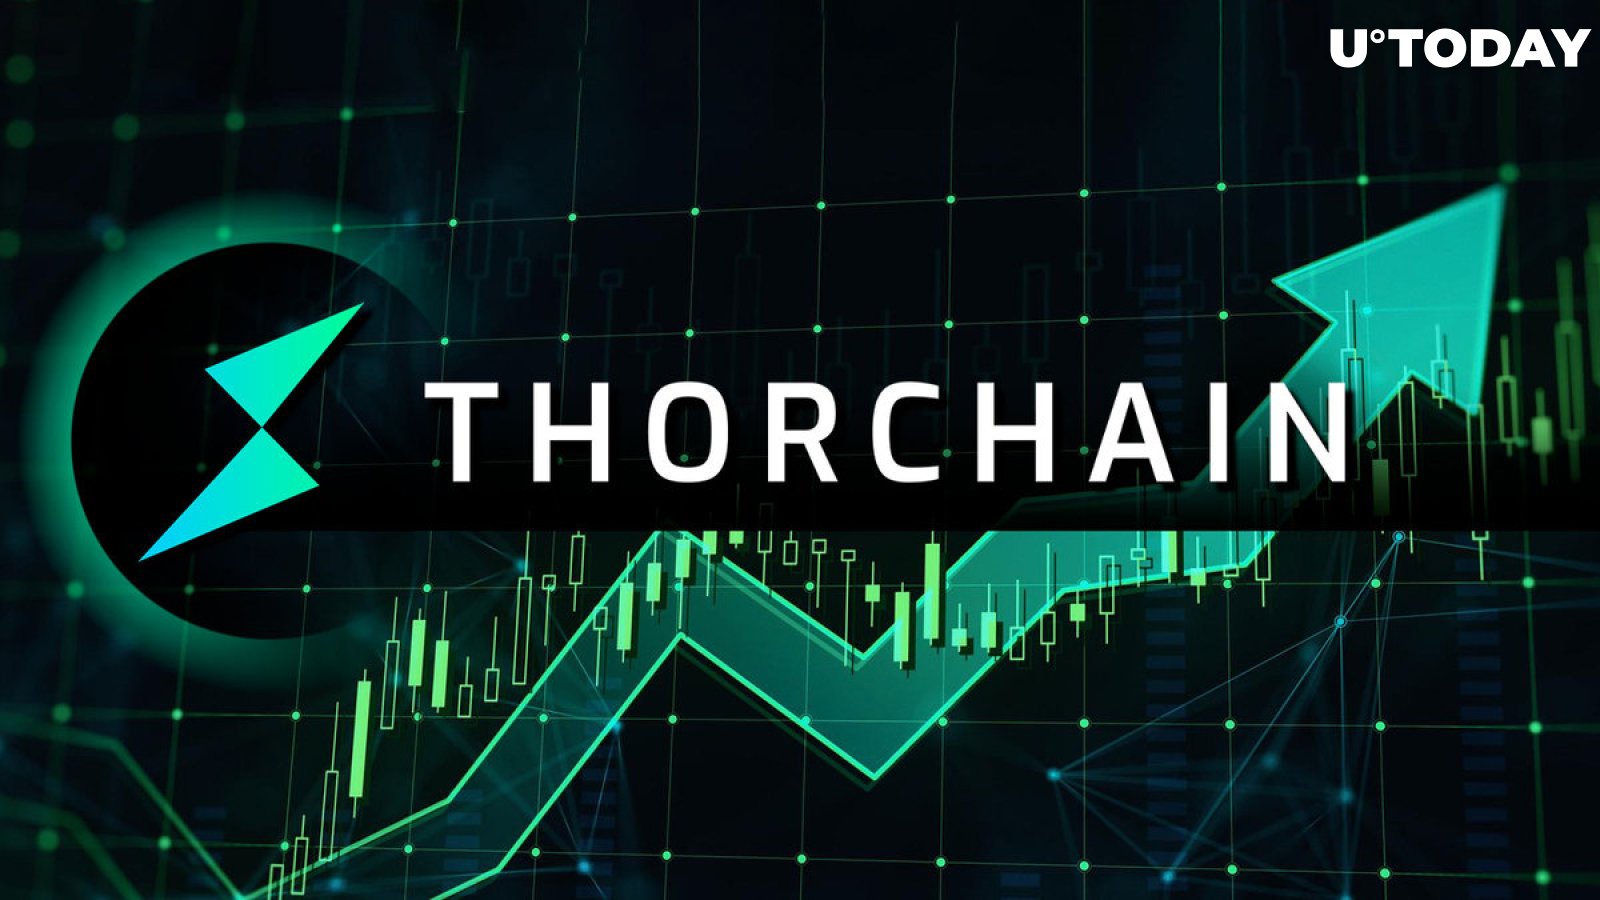 Thorchain (RUNE) Price Pumping Like on Steroids: Reasons